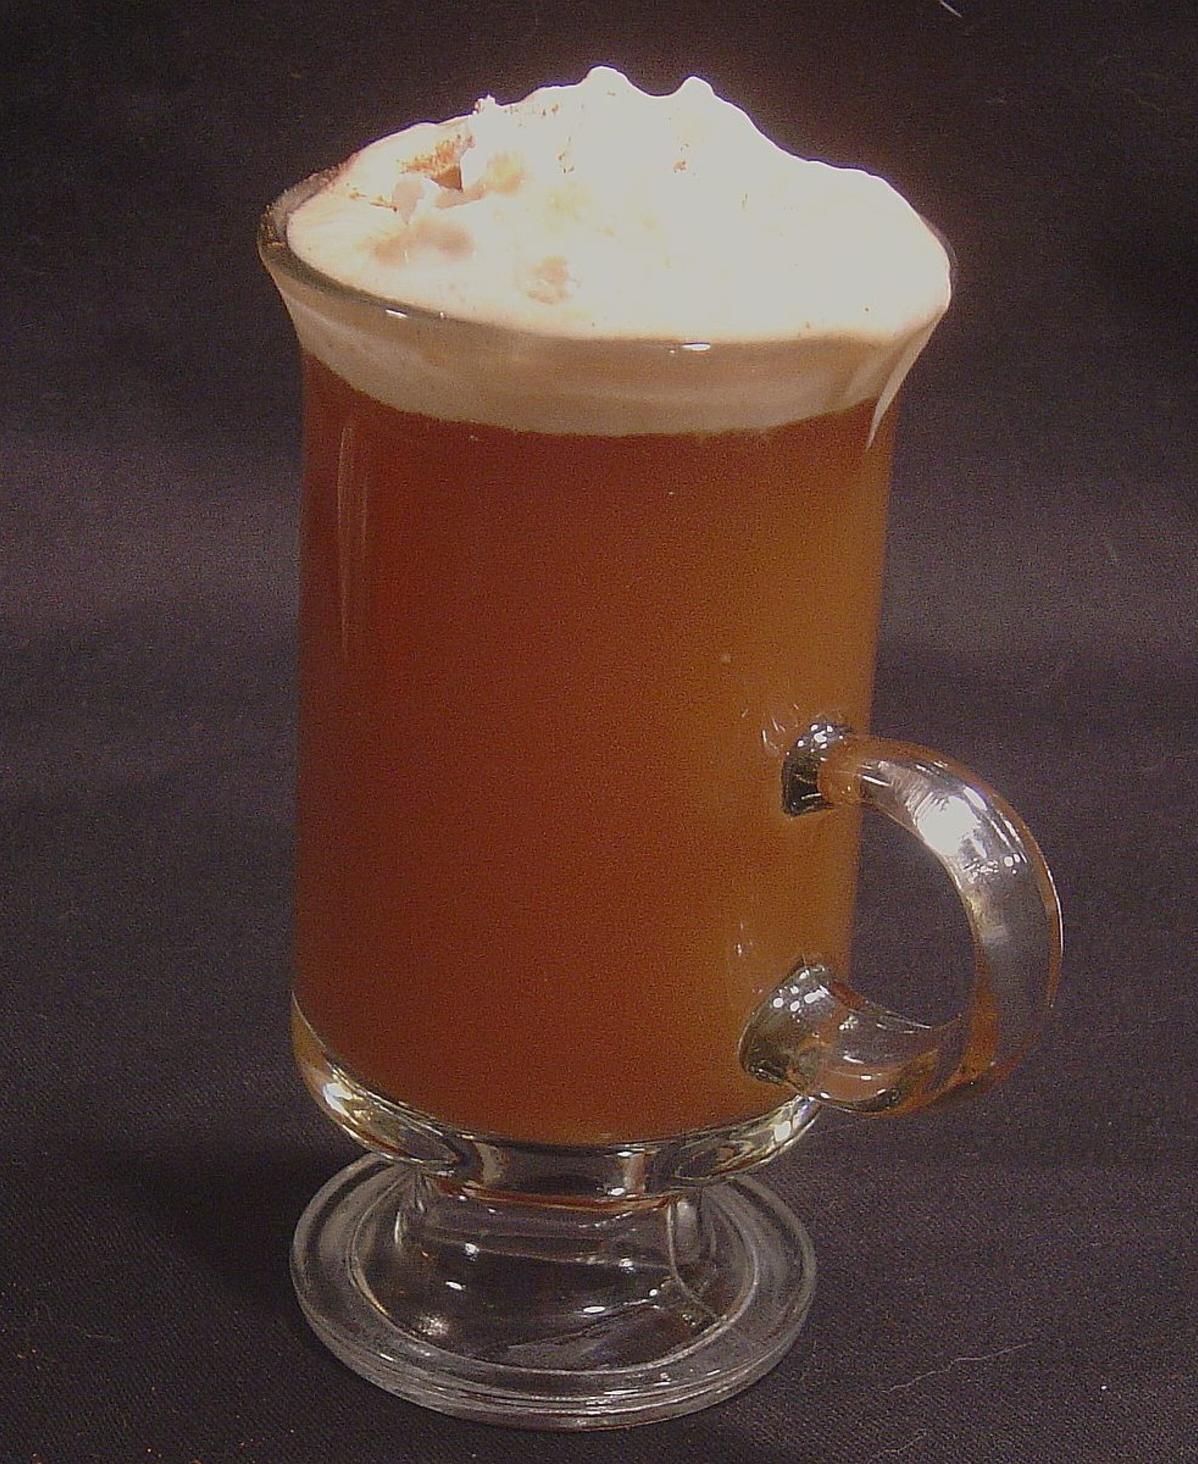  This delicious caramel coffee cider will satisfy your cravings and warm your soul!